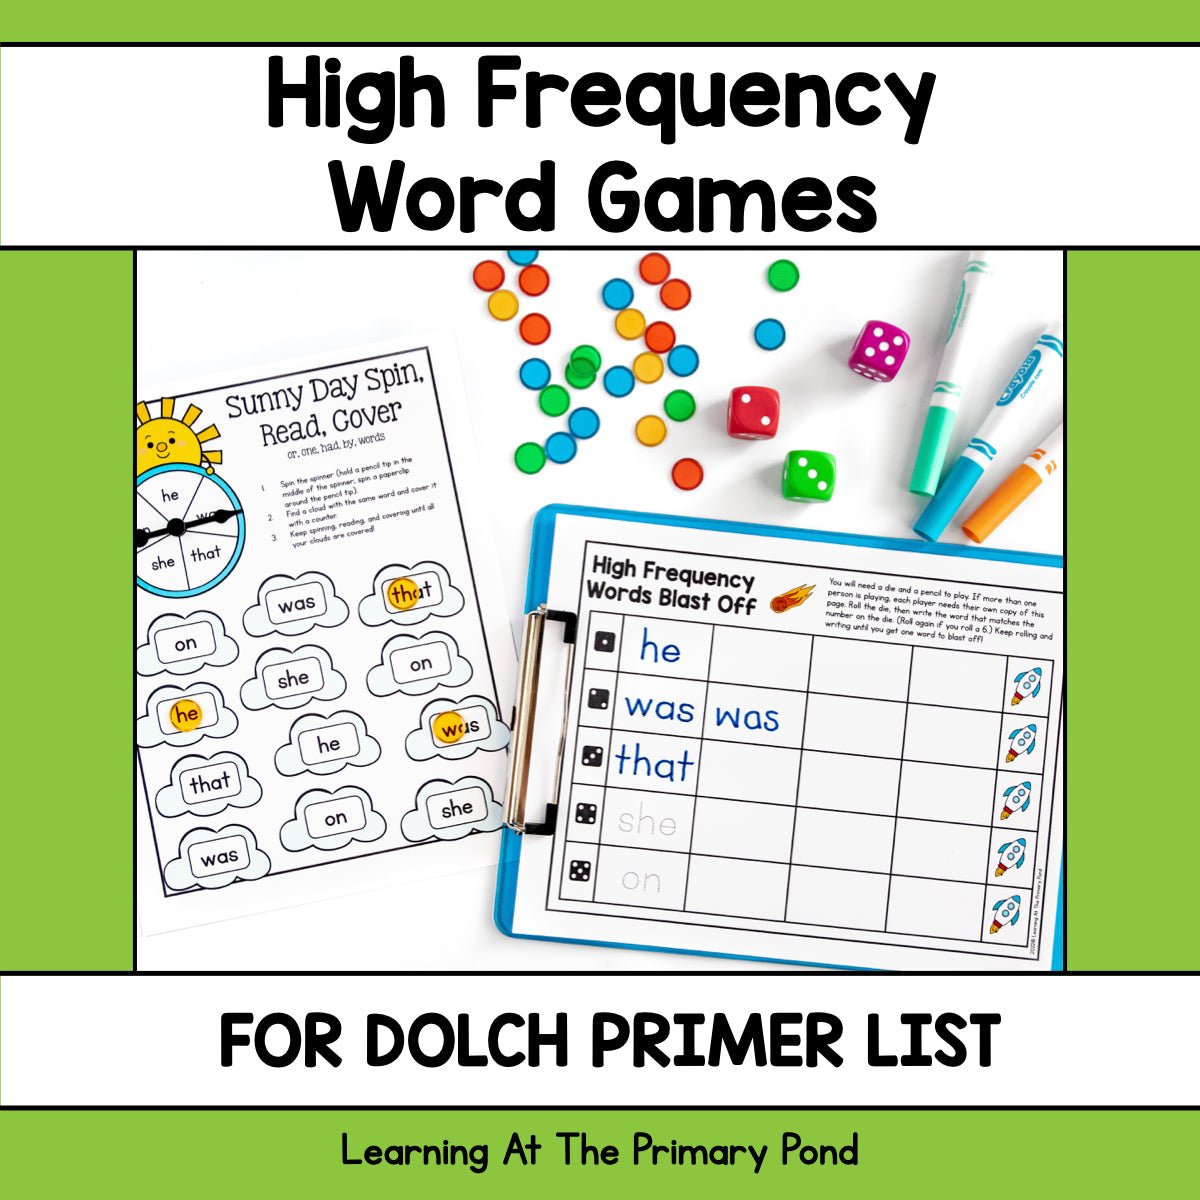 High Frequency Word Games | Dolch Primer Words - learning-at-the-primary-pond